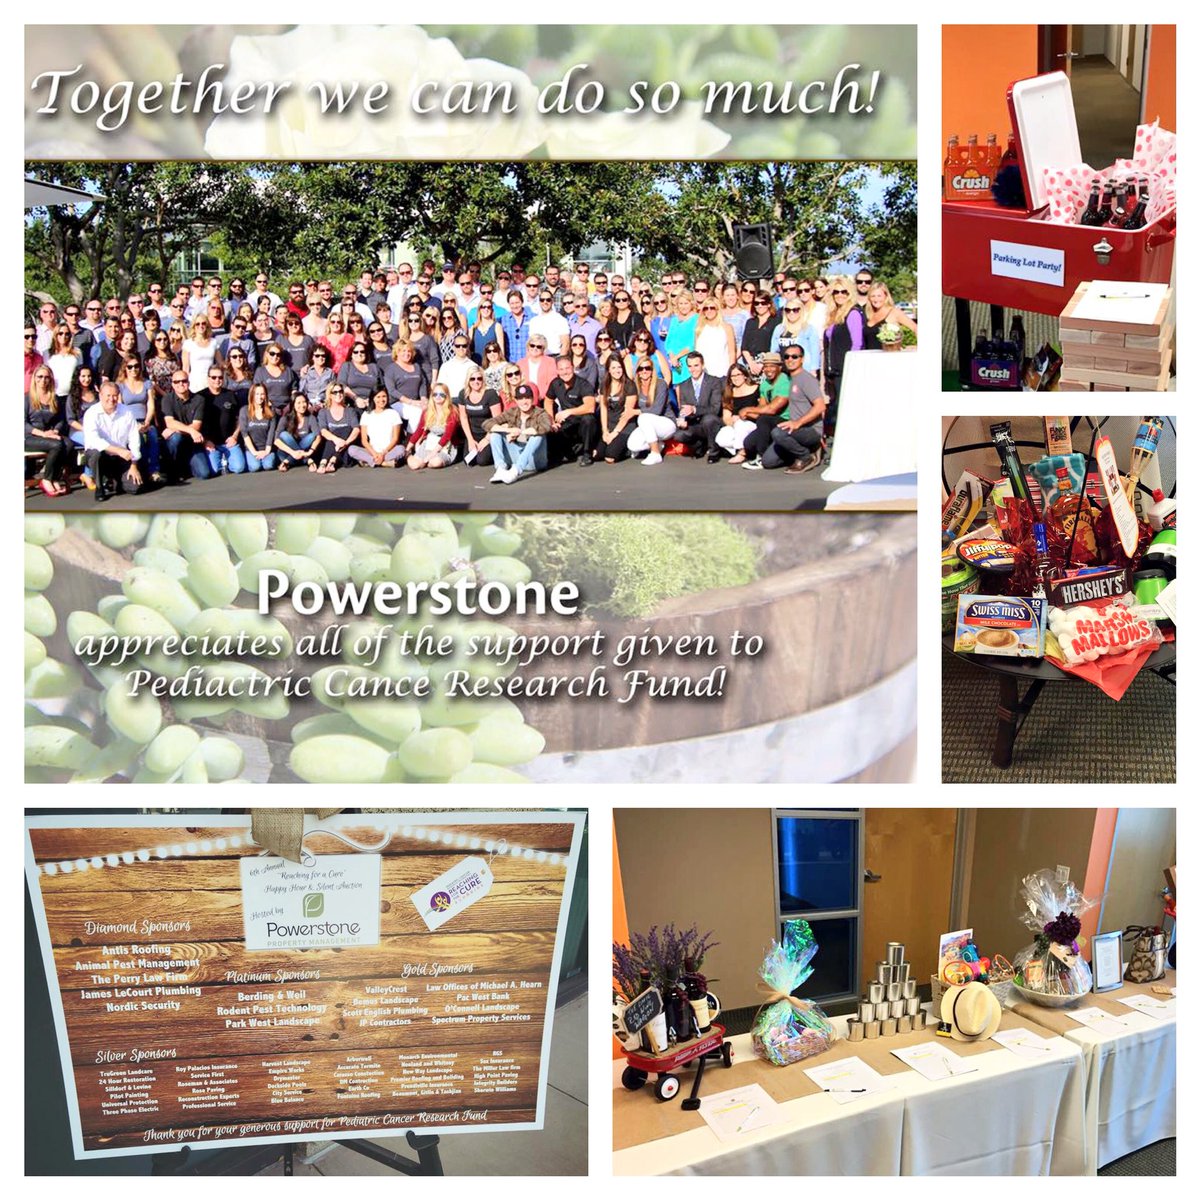 #FBF The @PowerstonePM #Fundraiser for the @PCRF_Kids with Kim Bistrong
#ReachingForTheCure #TMLF #SilverSponsor